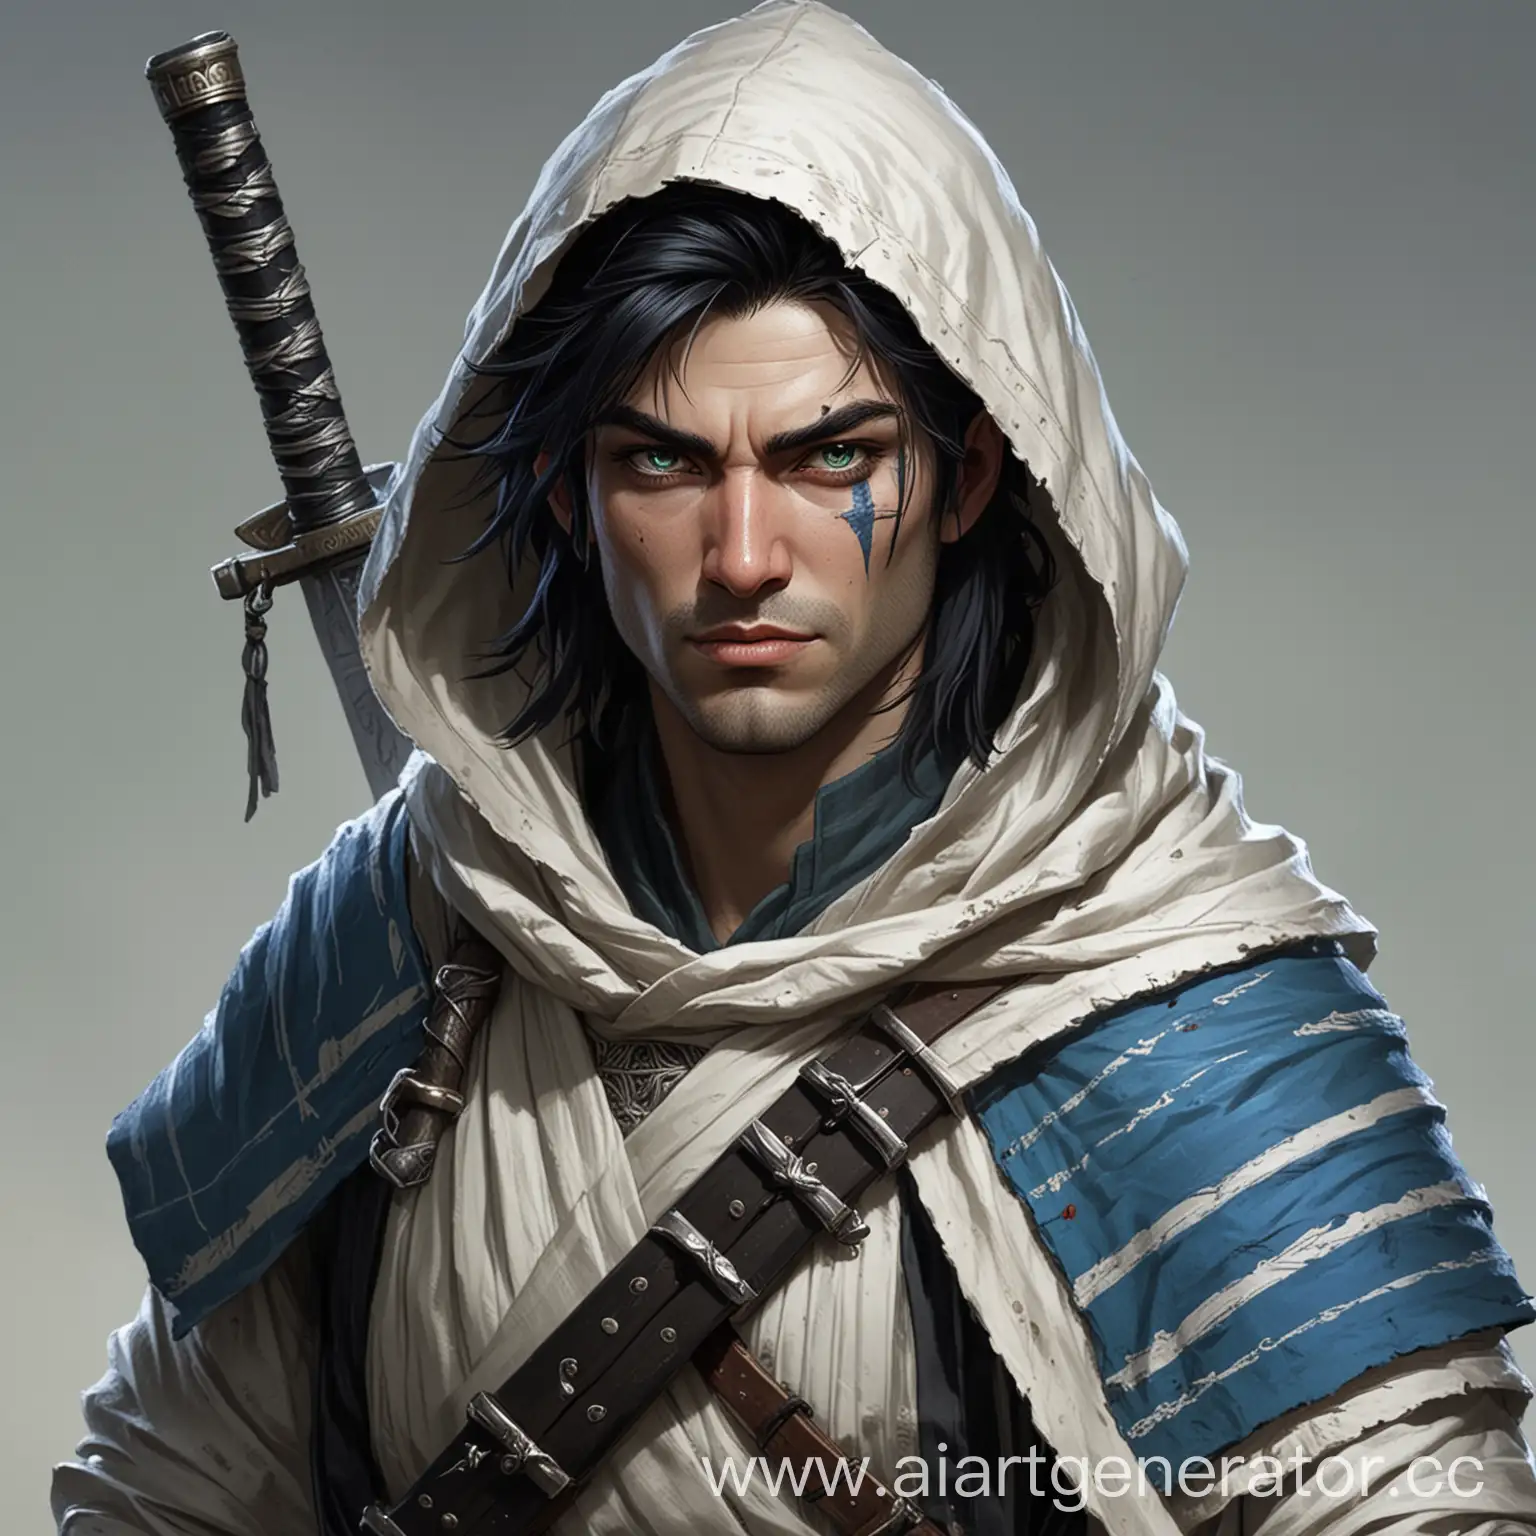 Dungeons-and-Dragons-5e-Human-Rogue-with-Katana-and-Striped-Cloak